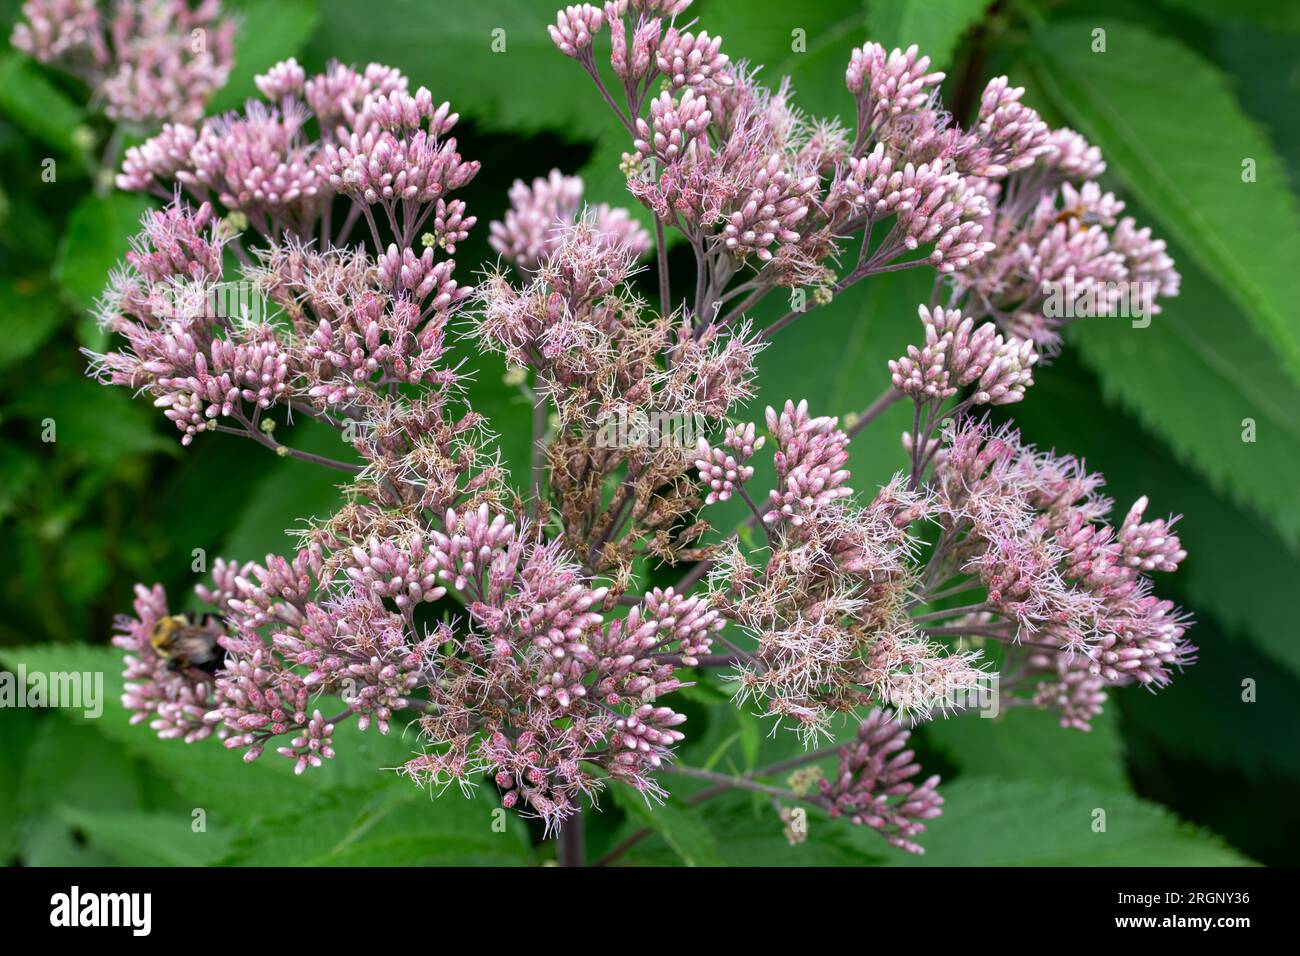 Full frame macro abstract texture background of mauve pink color Joe-Pye weed flowers in bloom in a sunny butterfly garden. Stock Photo